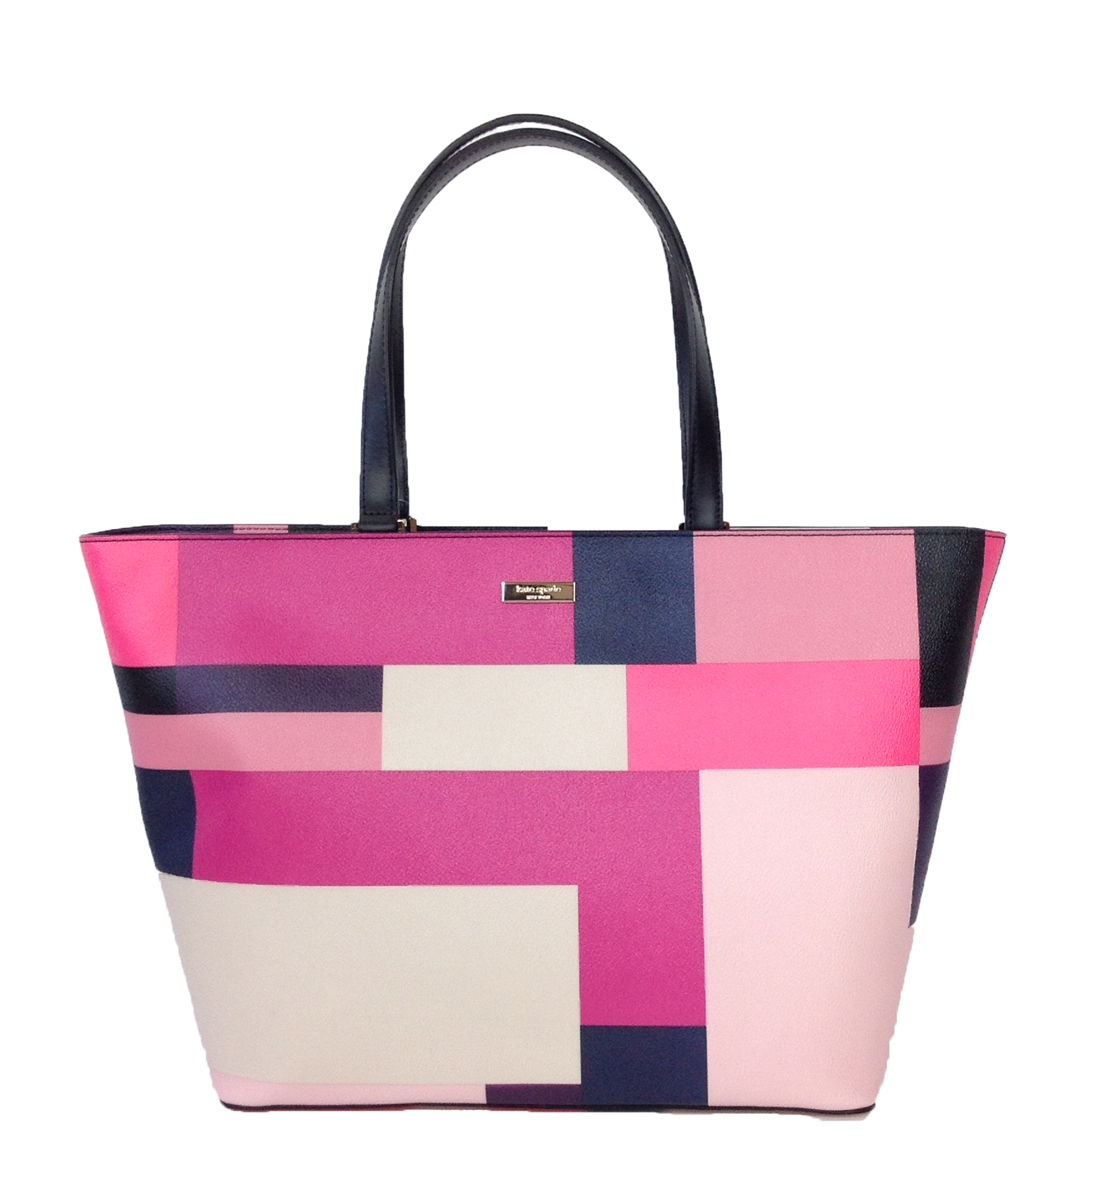 GWP Tote Bag - Multicolor by Kate Spade for Women - 1 Pc Bag